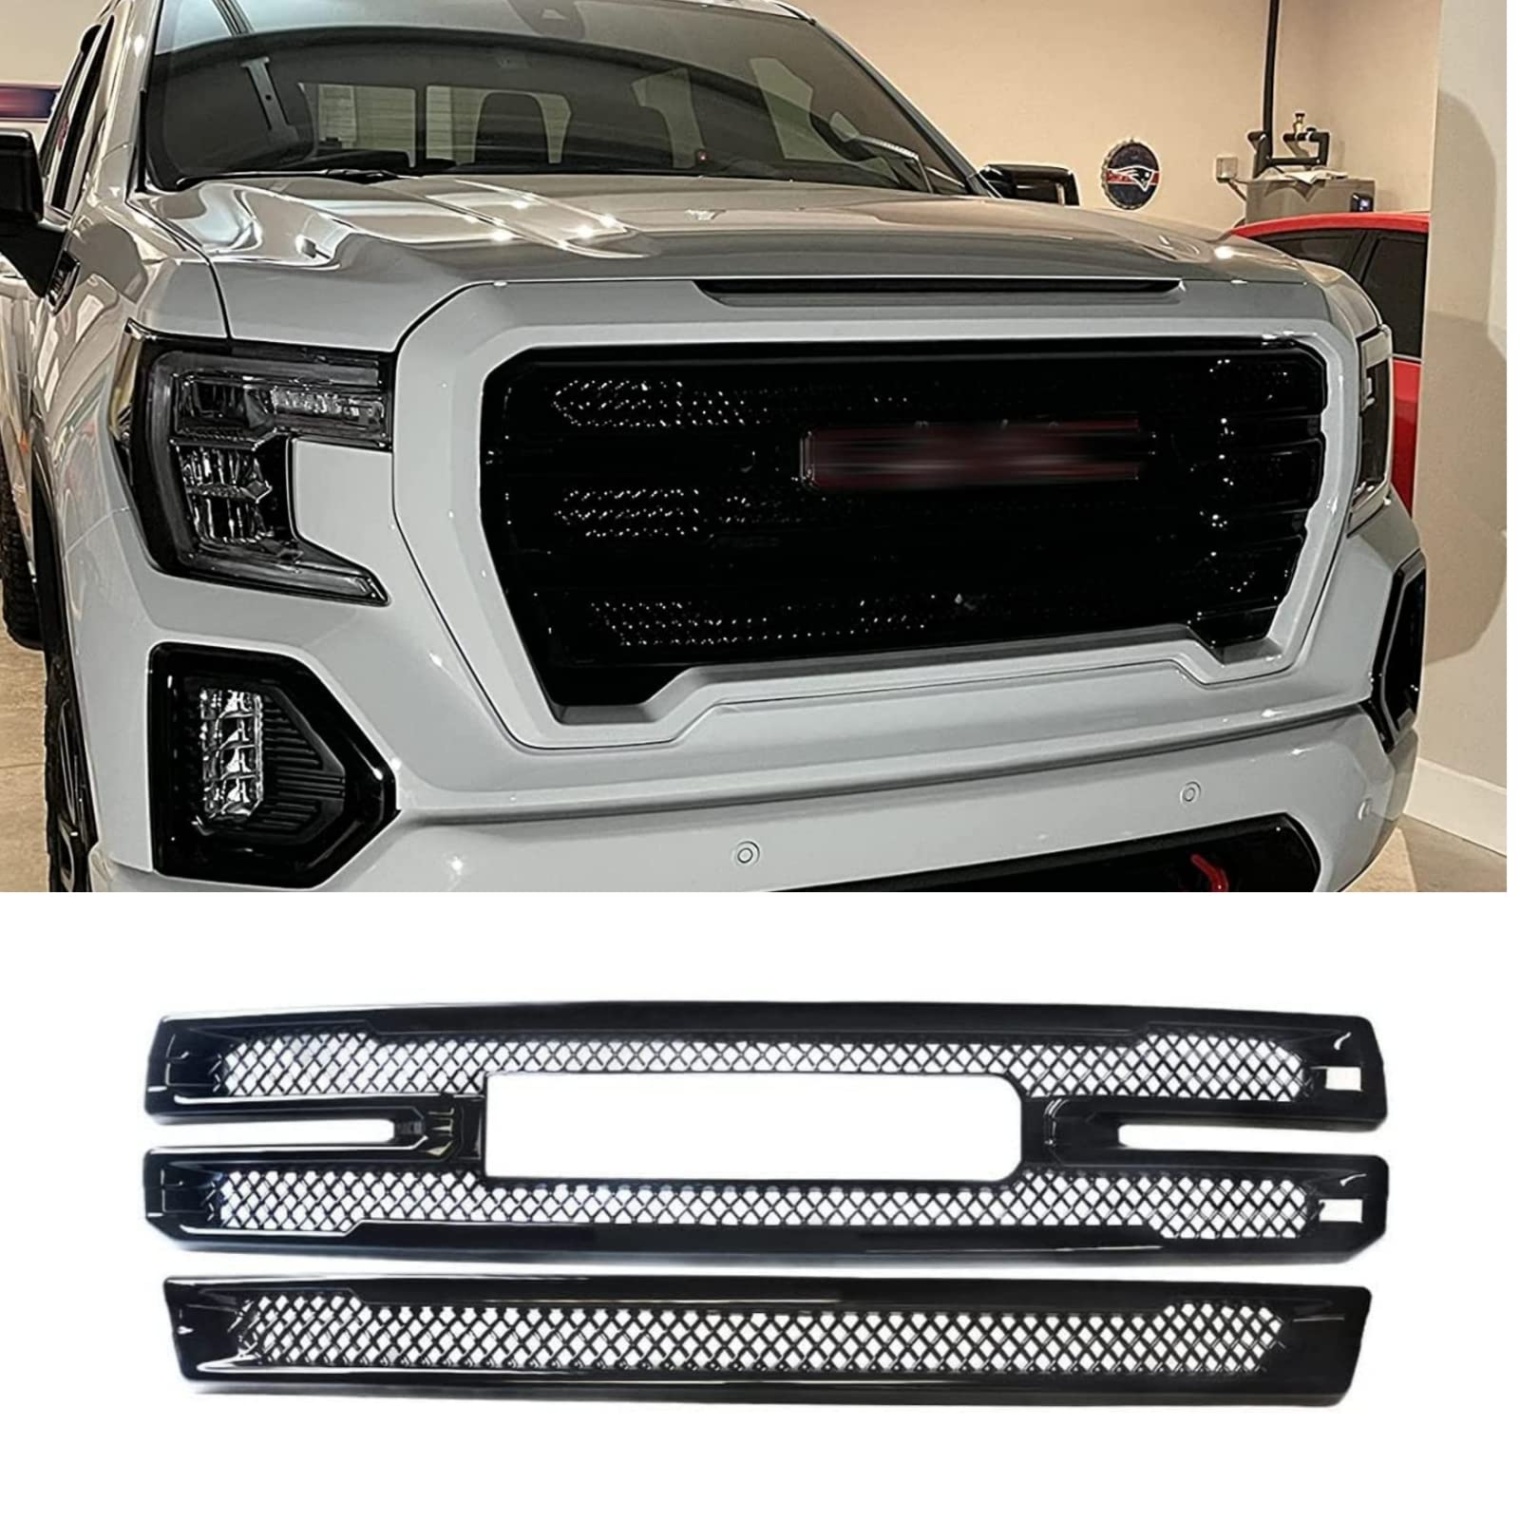 2022 gmc sierra accessories Bulan 1 Grill Fit For - GMC Sierra  SLT AT Front Grille Cover Front  Bumper ABS Painted Overlay Trim Kit Sierra Accessories Exterior Gloss Black